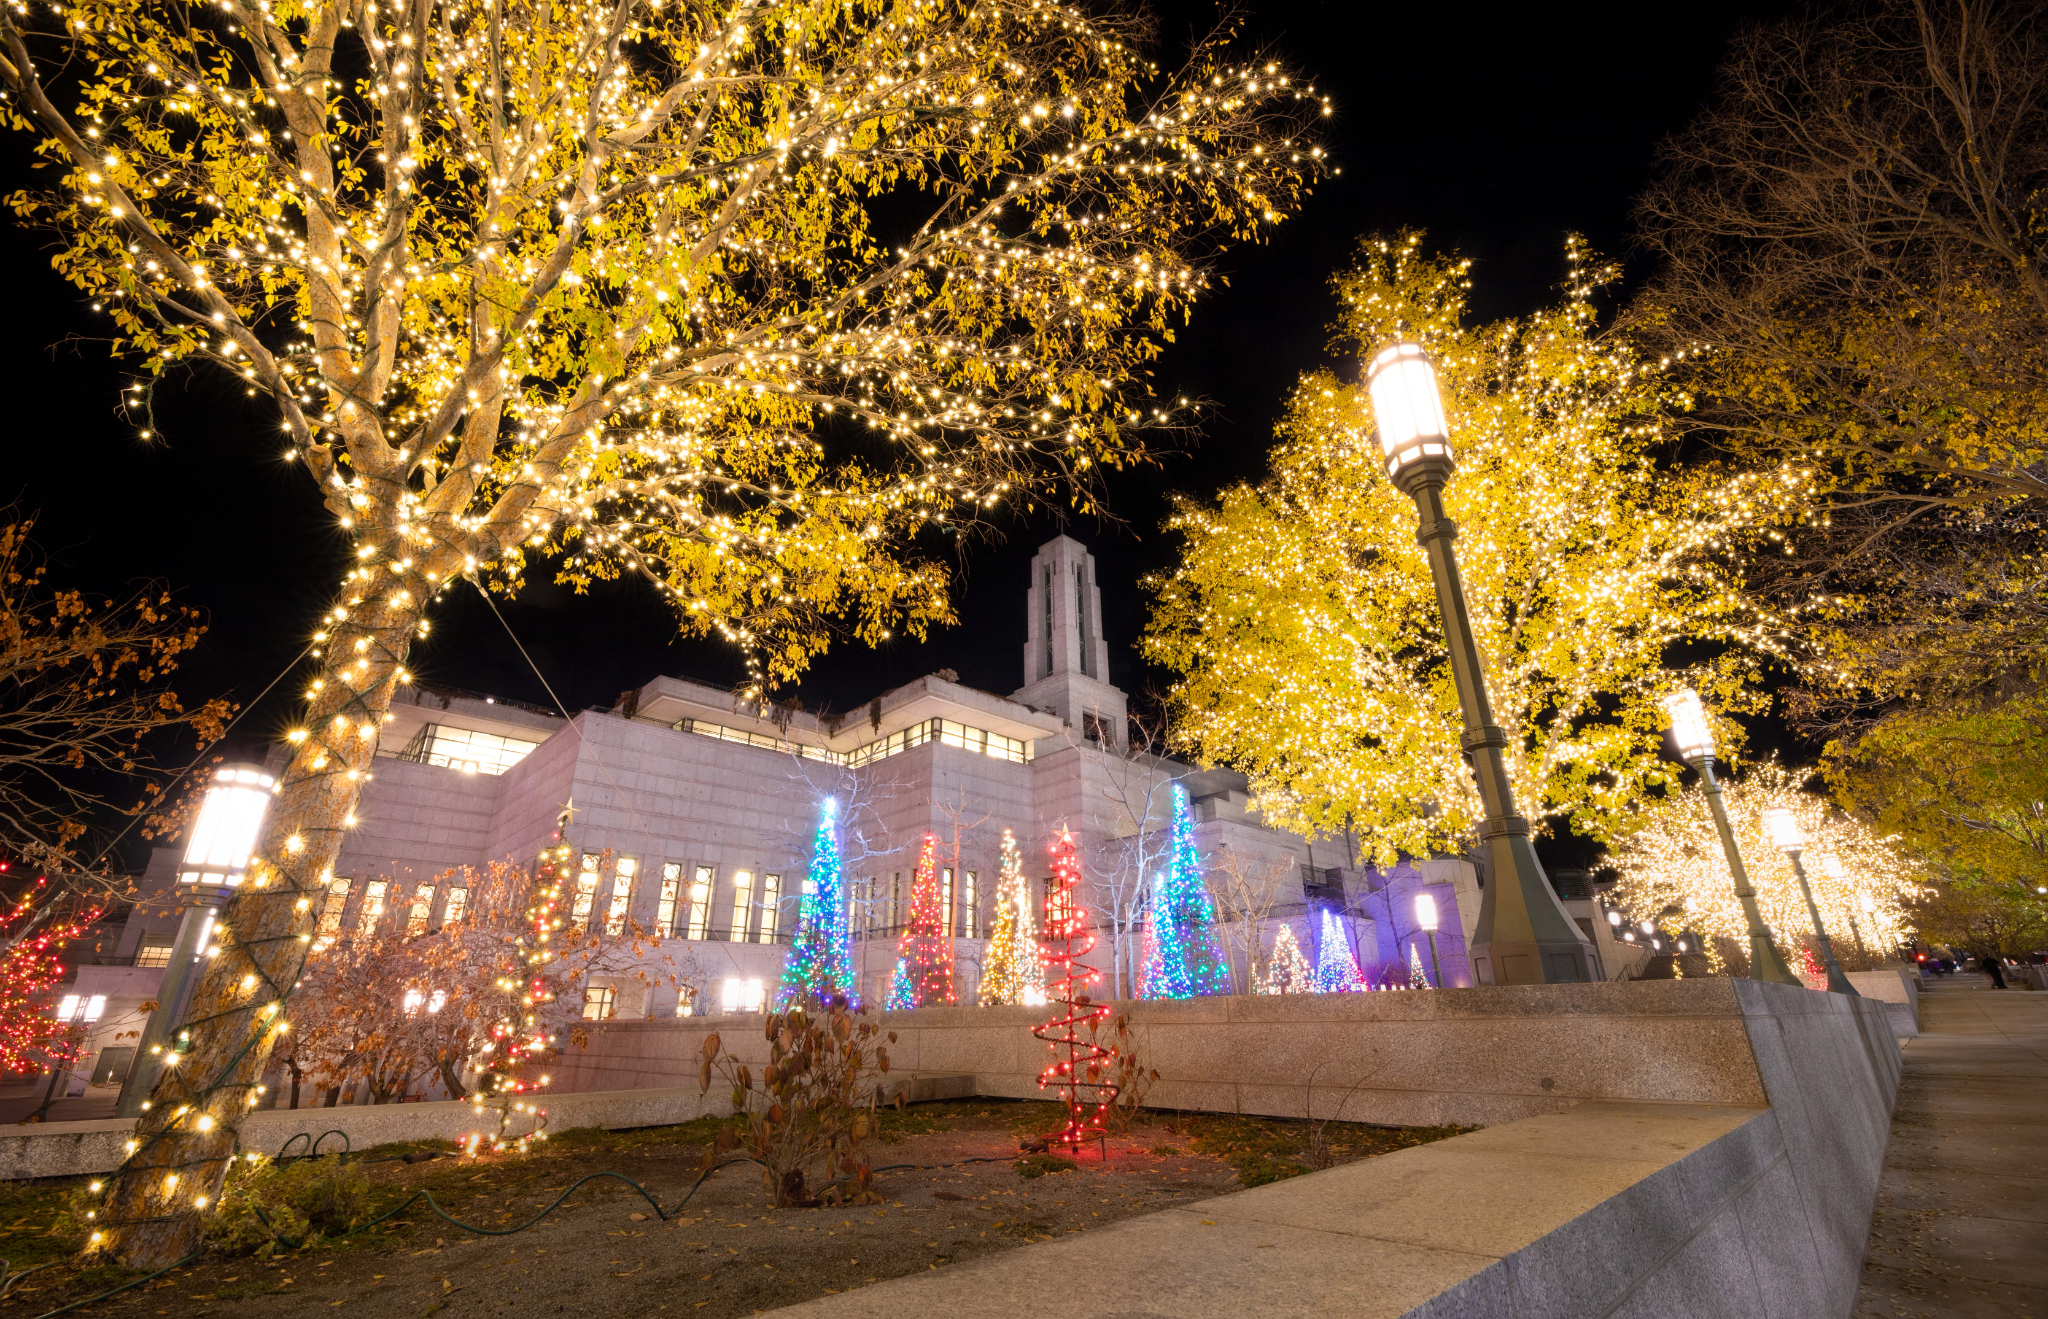 The annual lighting of Temple Square has been a tradition for many families and individuals since t...